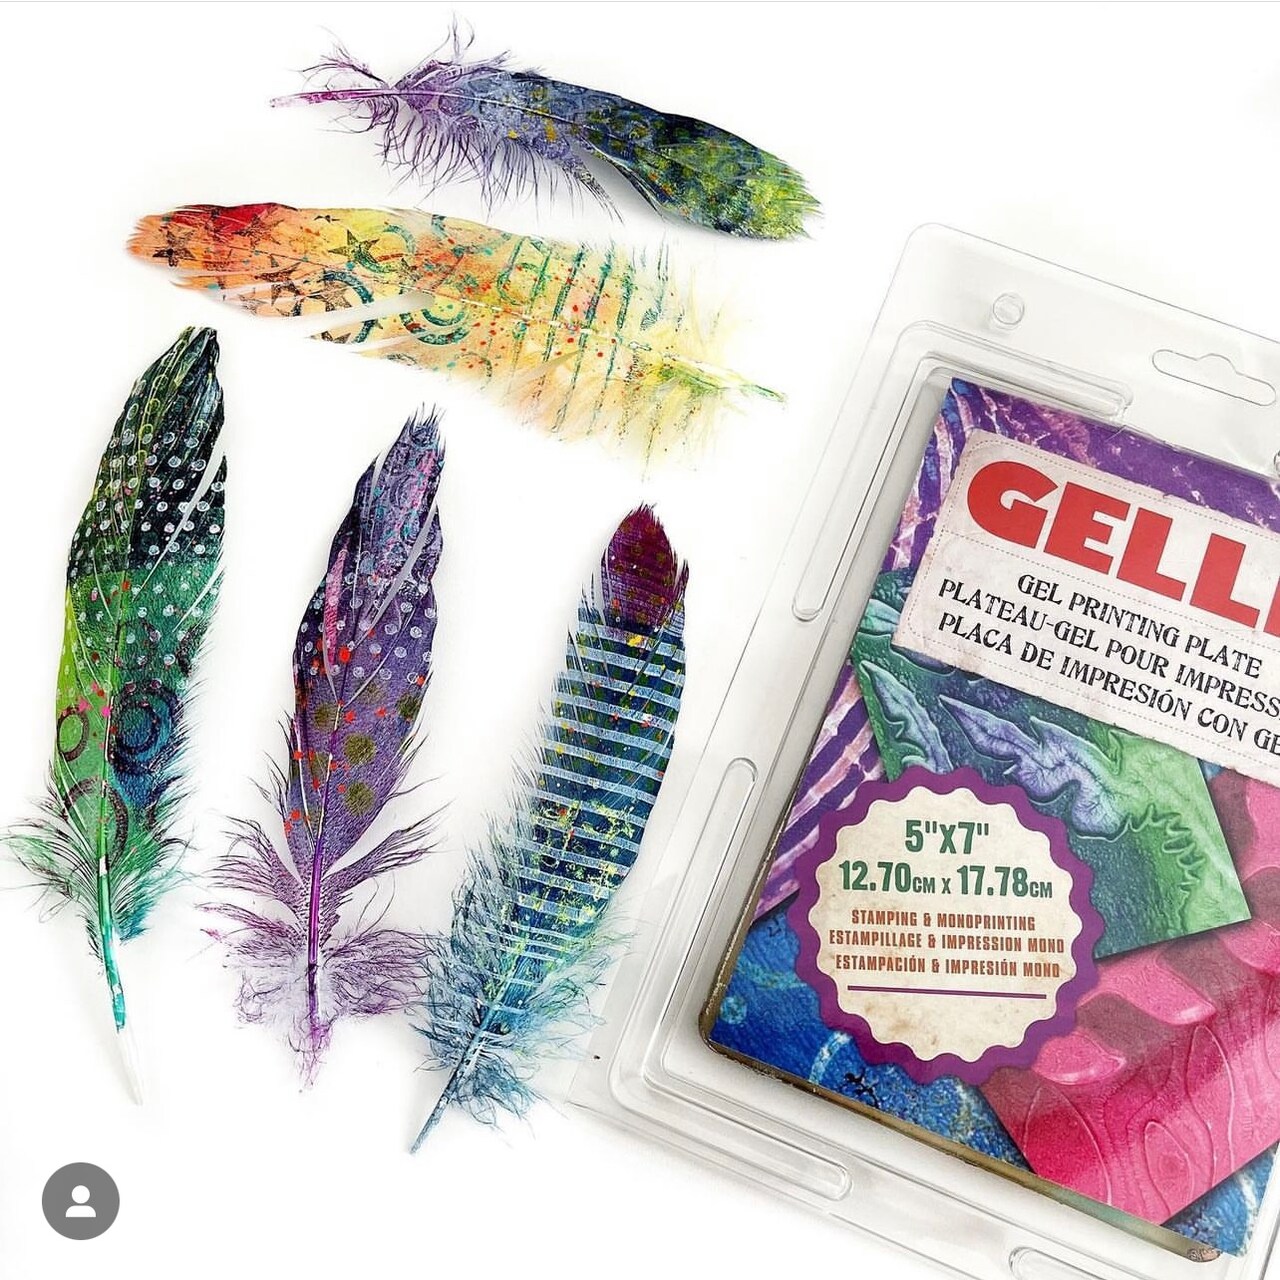 Gel Printing on Feathers with Gelli Arts®